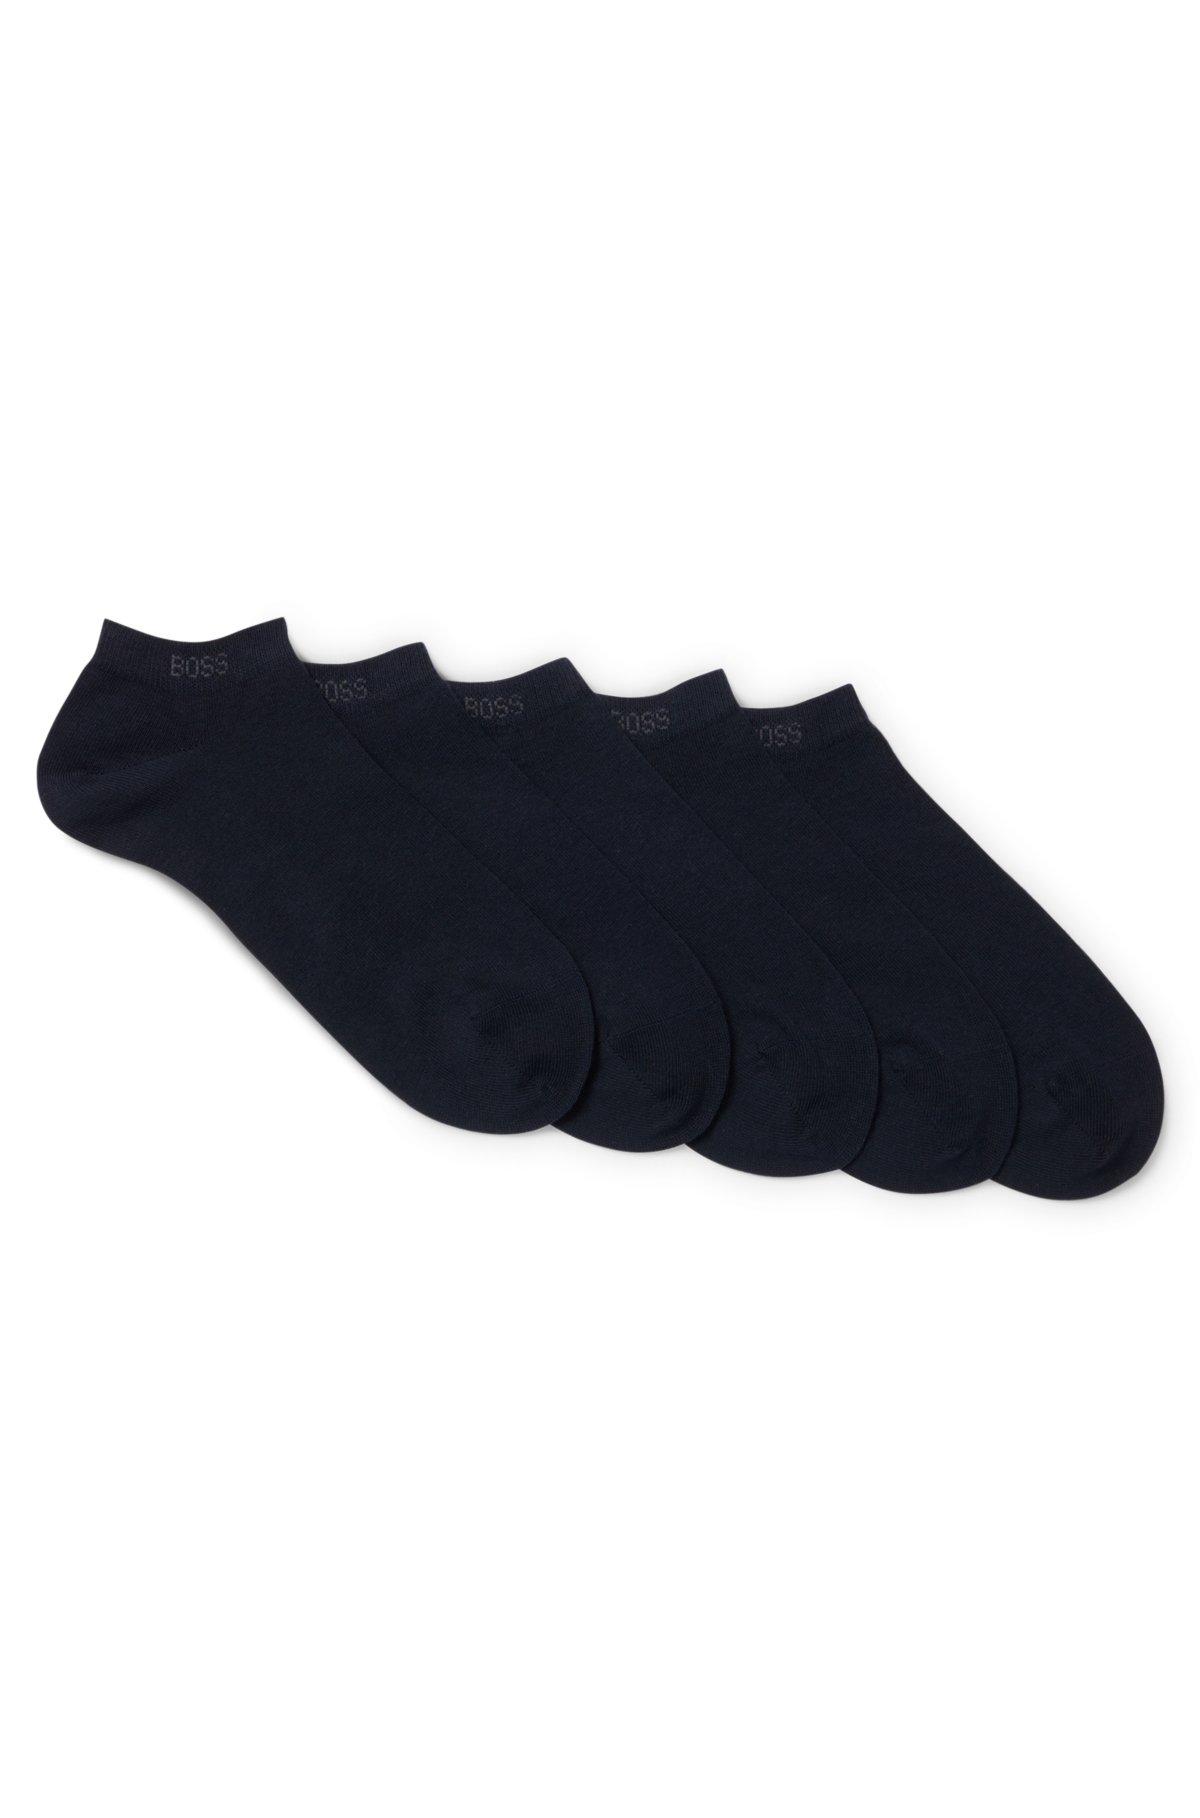 BOSS - Five-pack of ankle socks in a cotton blend